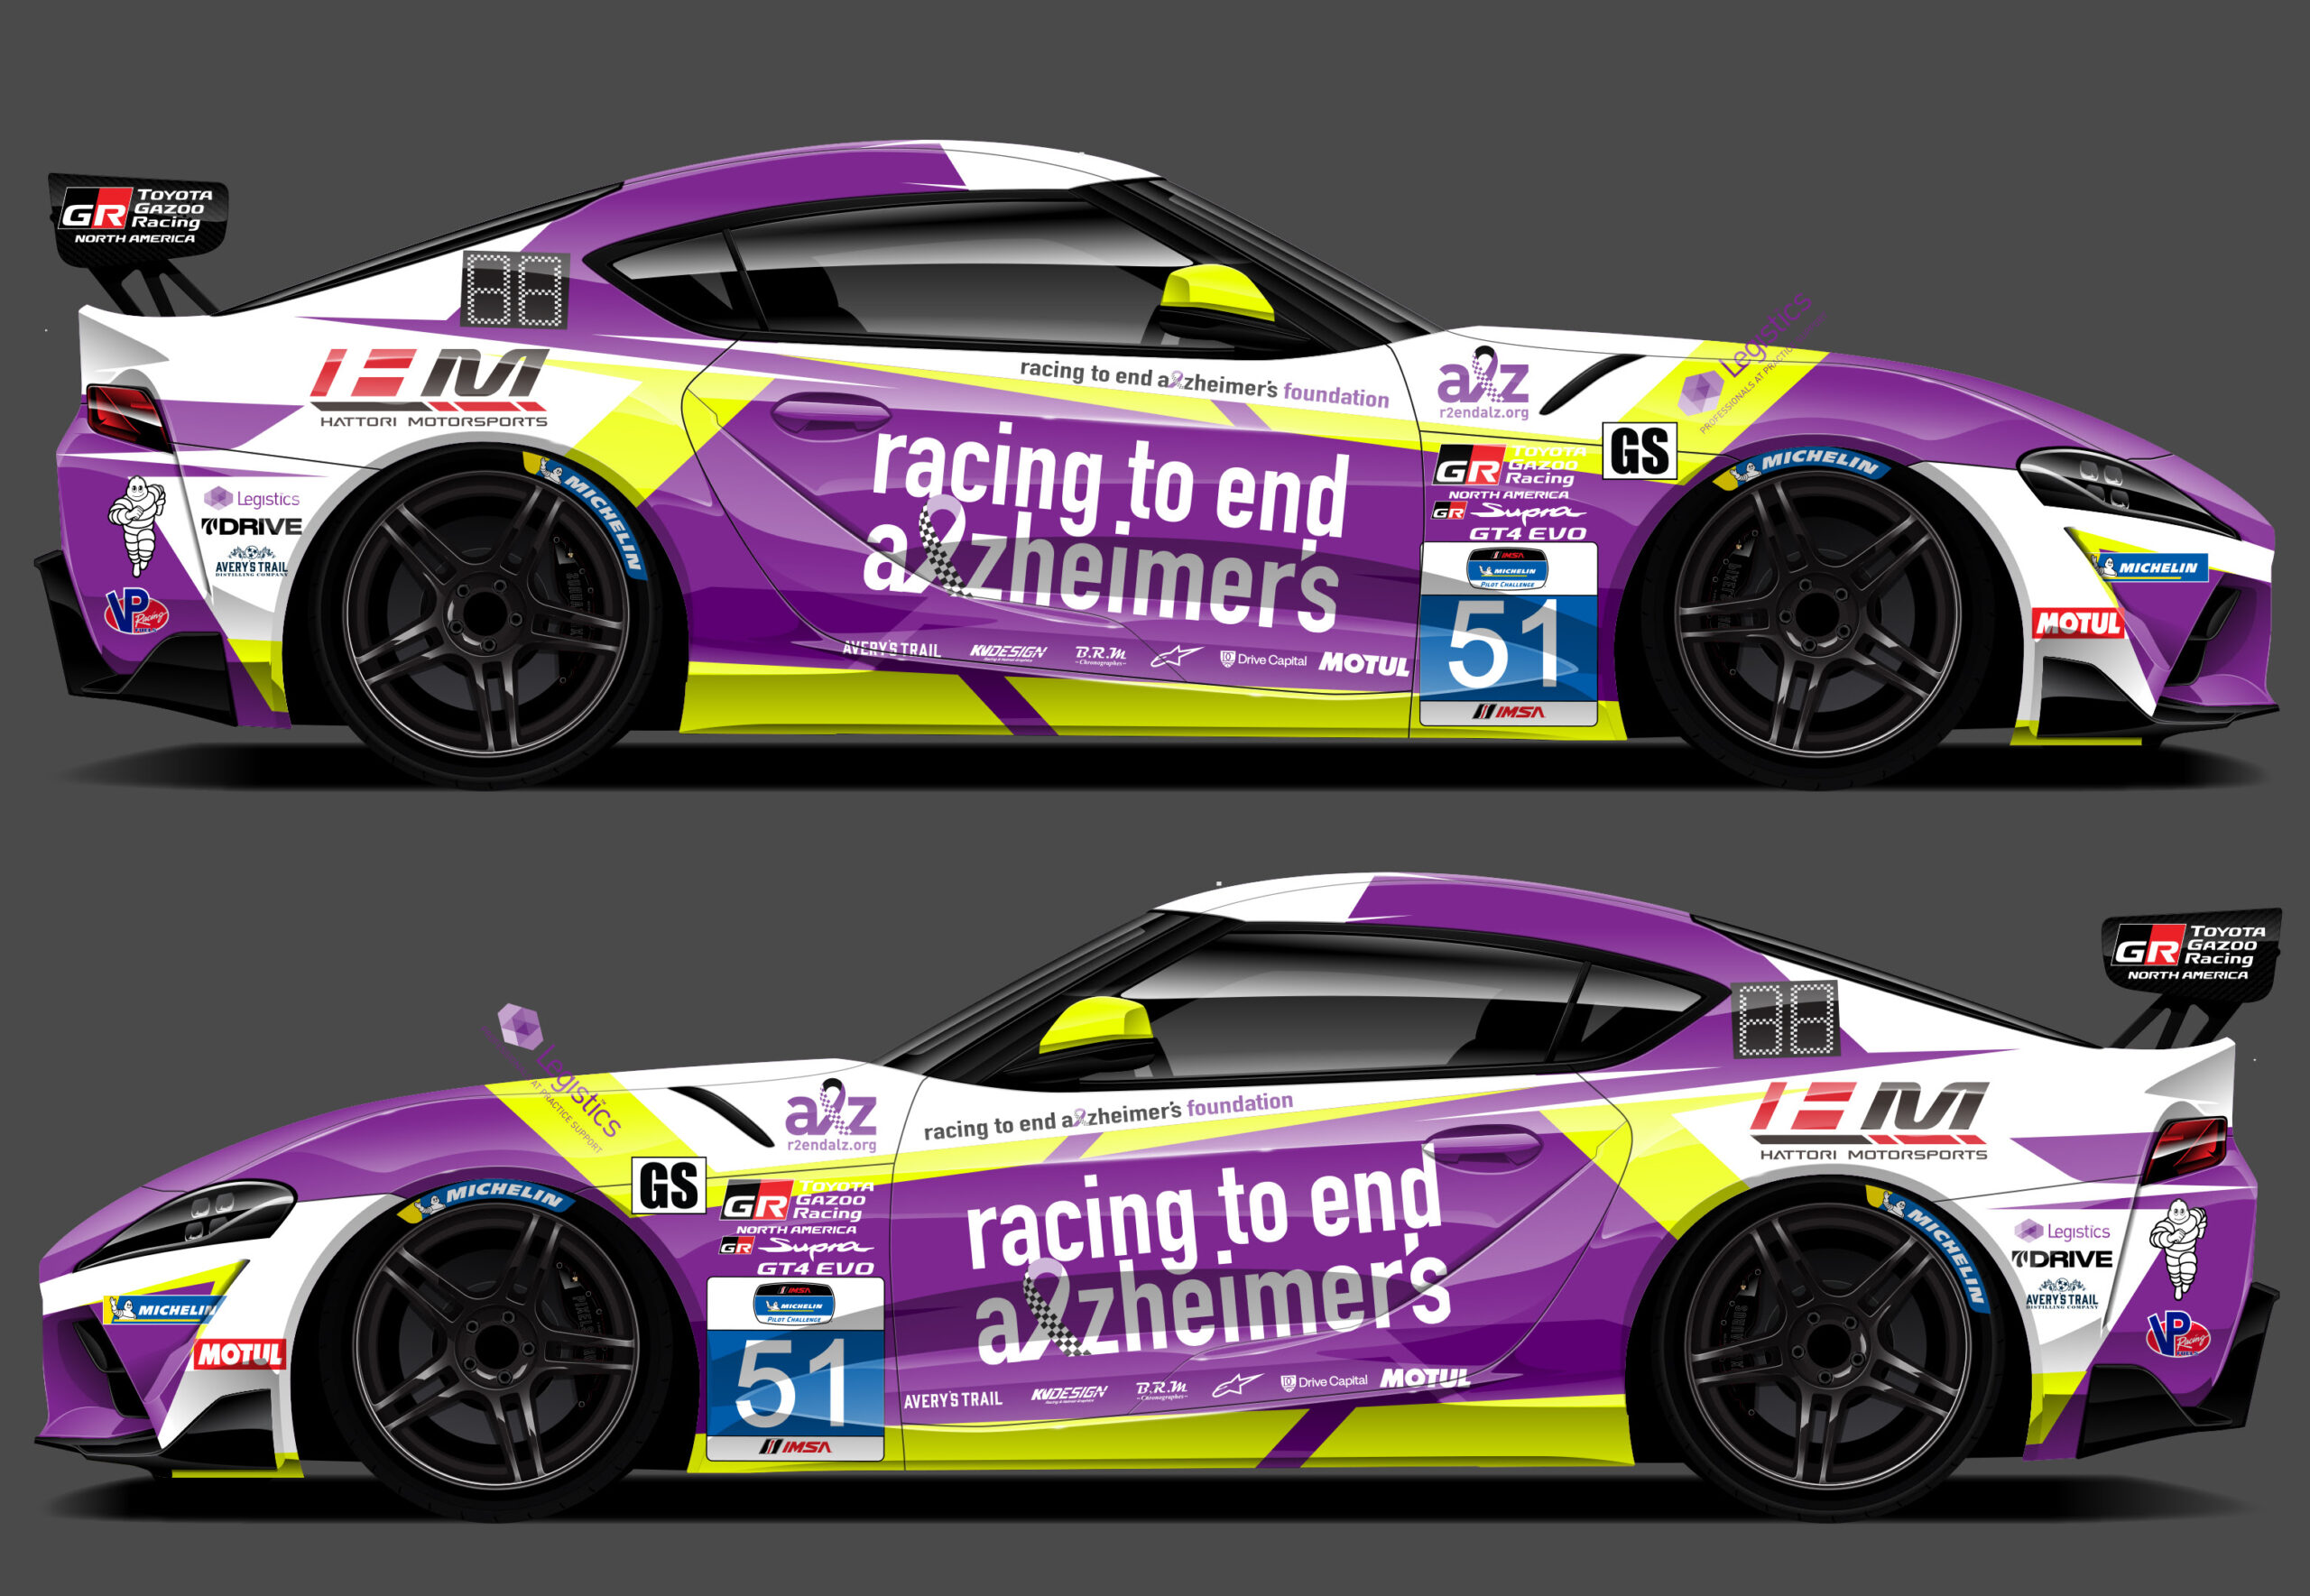 Racing to End Alzheimer’s to contest Michelin Pilot Challenge event at Daytona